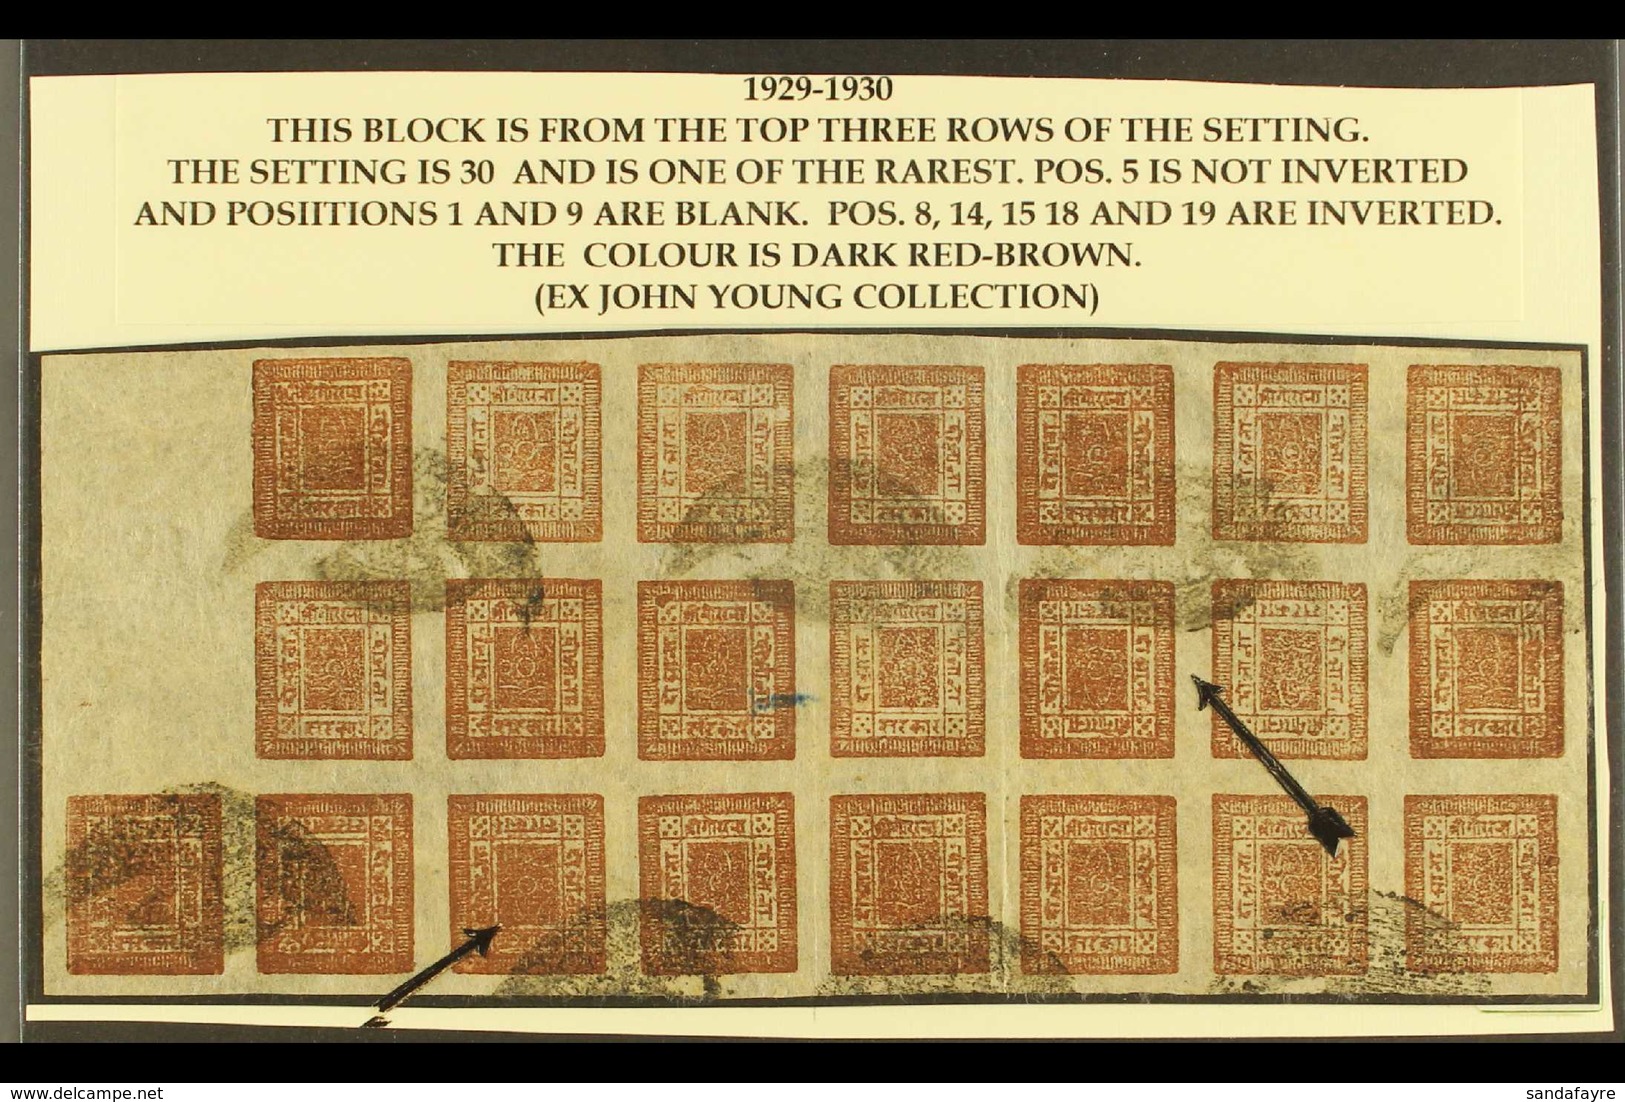 1917-30  2a Brown (SG 40, Scott 16, Hellrigl 41/42), telegraphically Used Block Comprising The Top Three Rows Of The RAR - Nepal